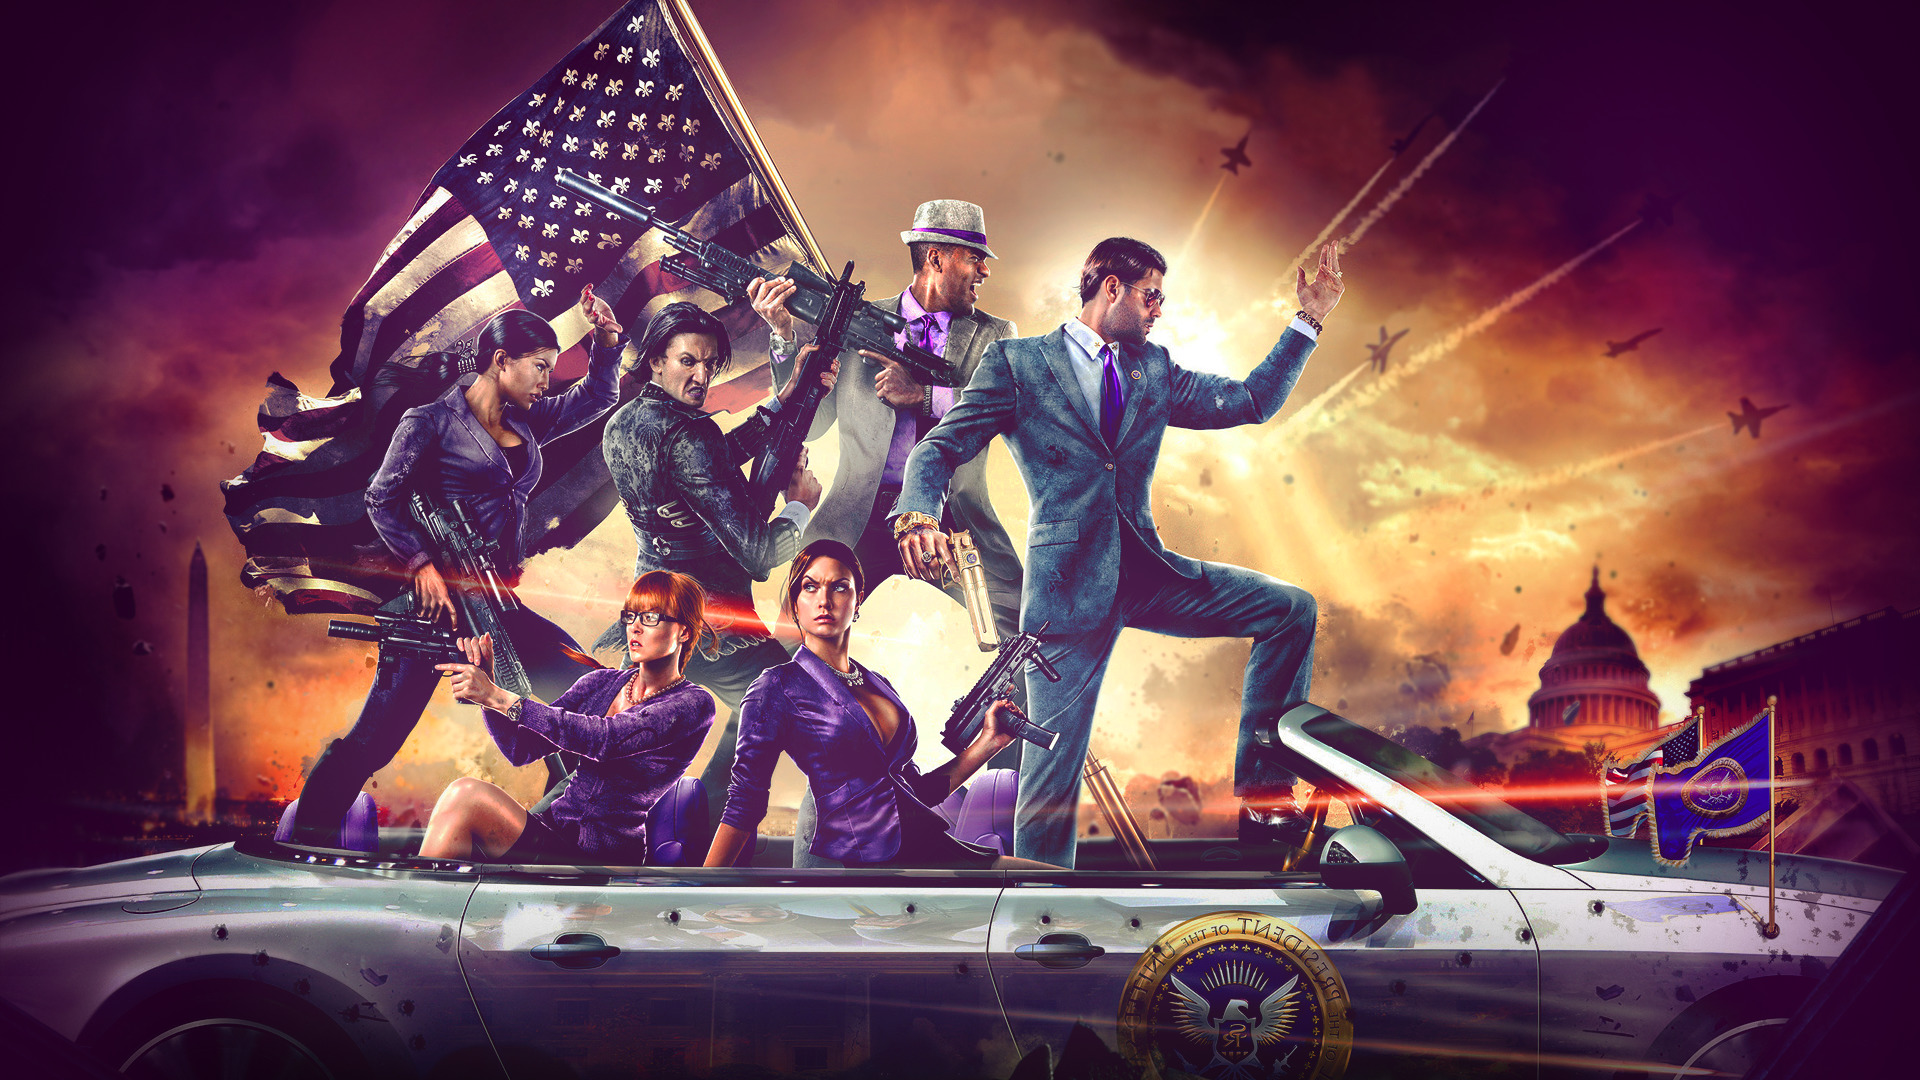 Saints Row IV, Video Games Wallpapers HD / Desktop and Mobile Backgrounds